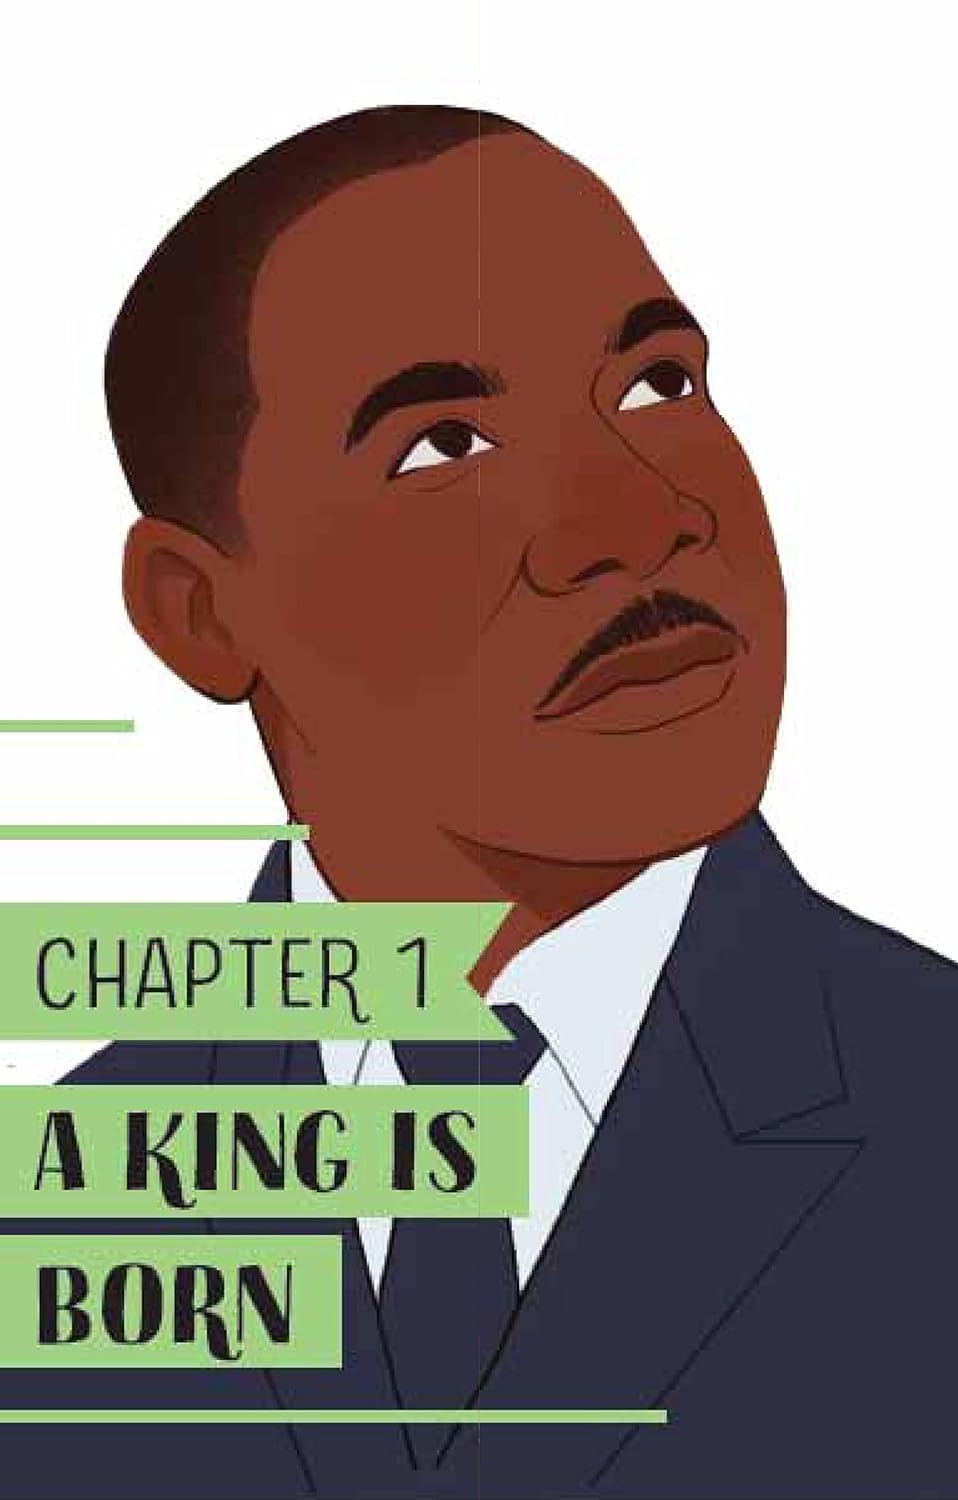 Pegasus The Story of Martin Luther King Jr.: A Biography Book